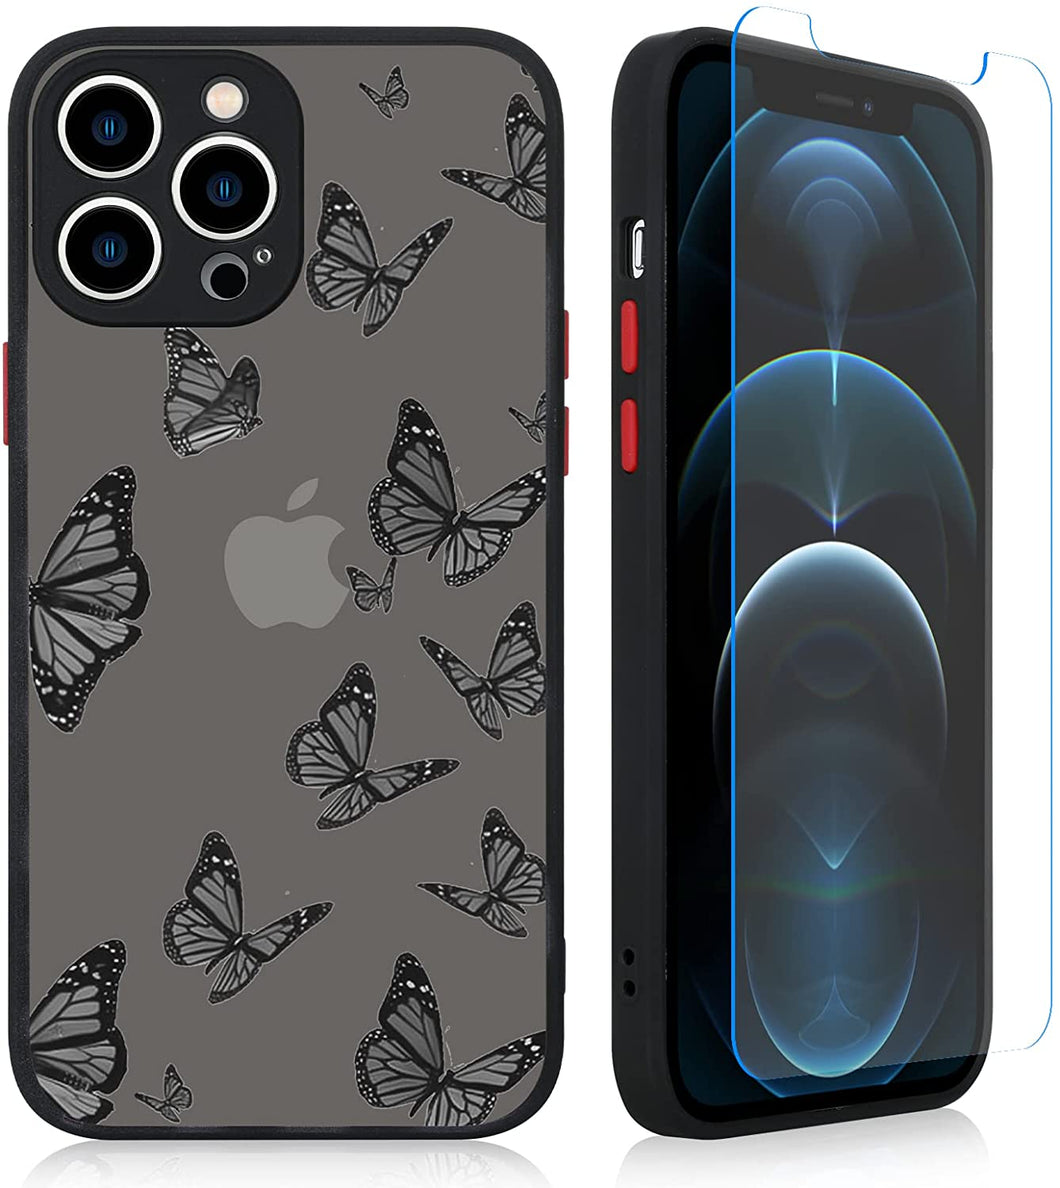 iPhone 12 Pro Max Black Butterfly Case for Women Girls with Screen Protector Protective Translucent Matte Soft TPU Bumper Cute Animal Print Design Hard PC Back Clear Phone Cover-Black 6.7